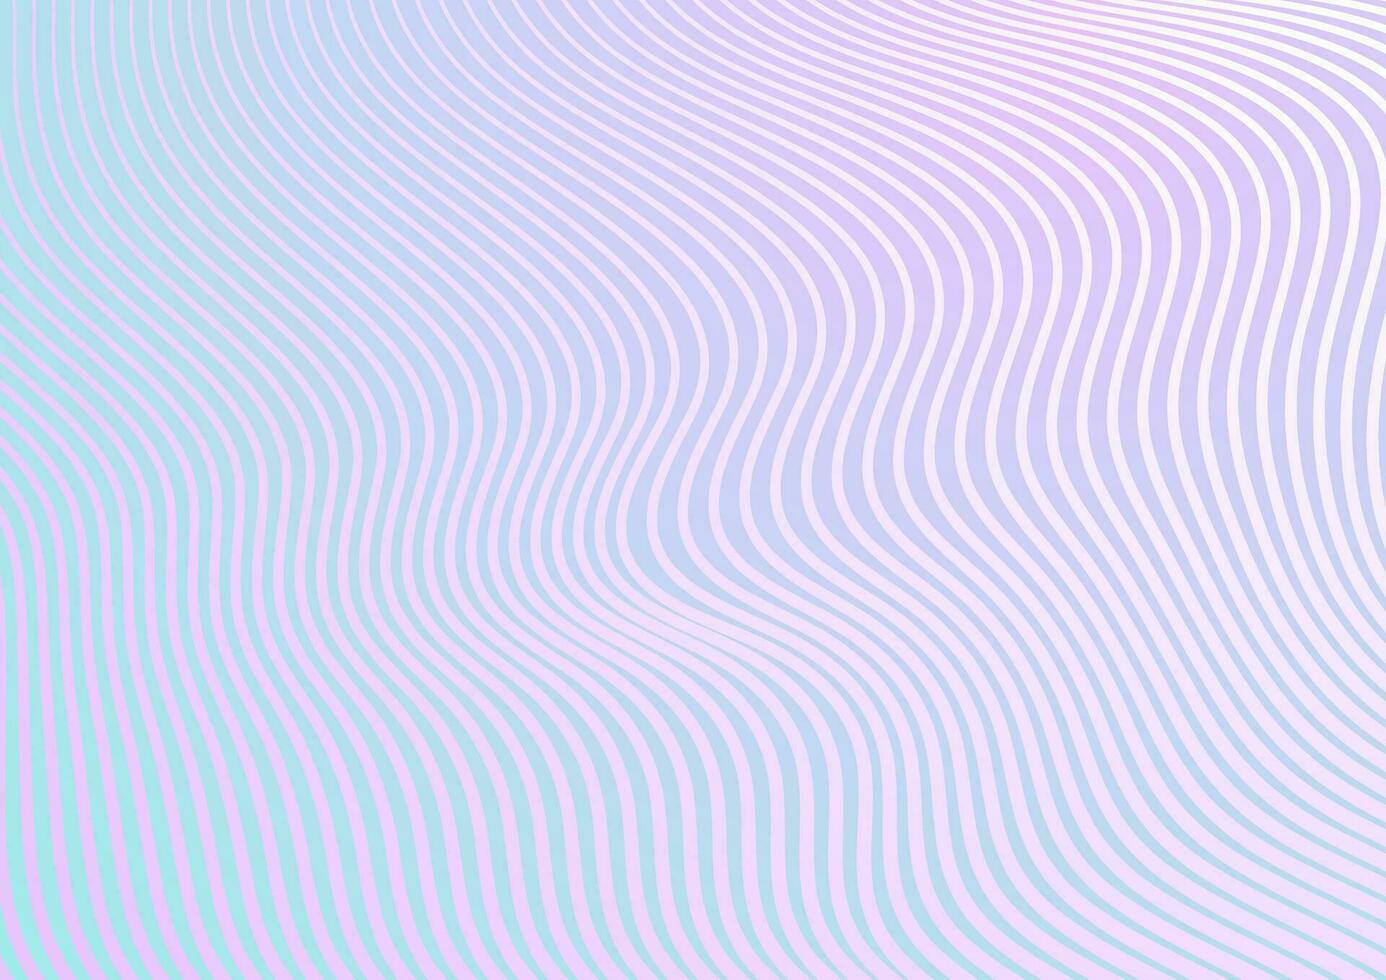 Minimal pastel trendy refracted curved waves background vector